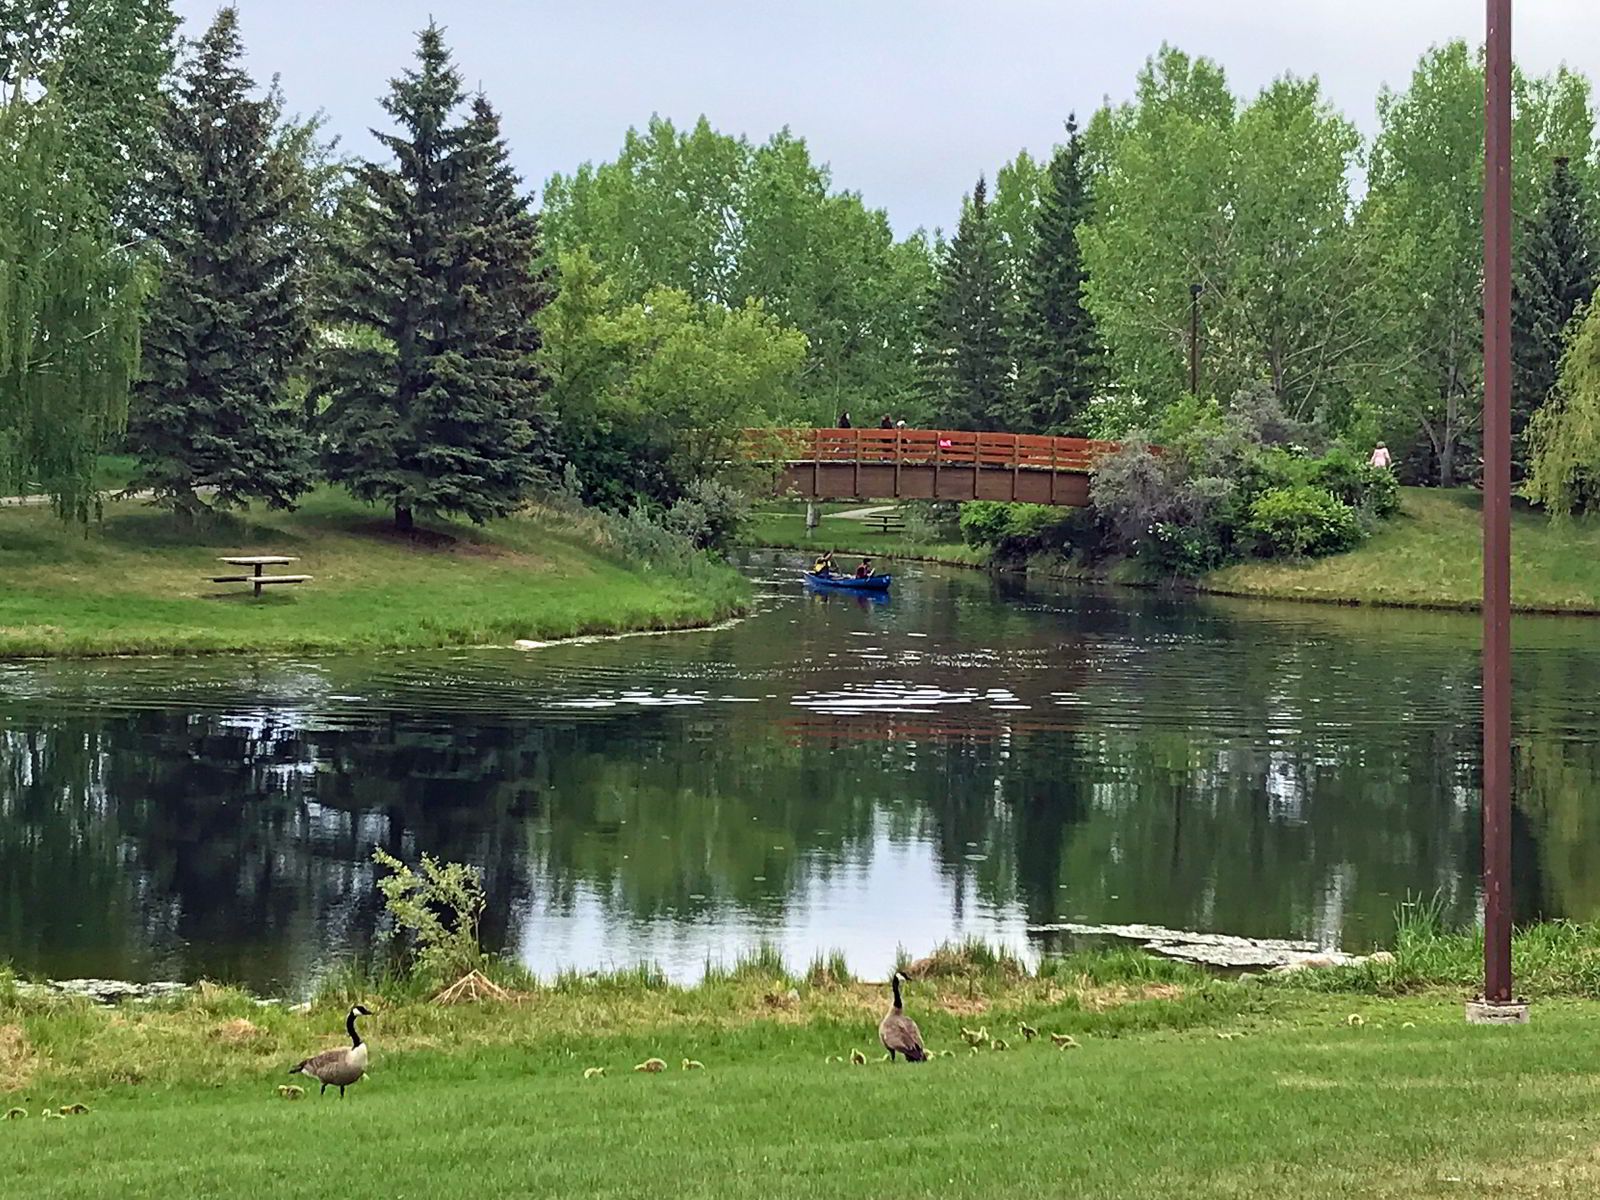 An image of Bower Ponds in Red Deer, Alberta, Canada.